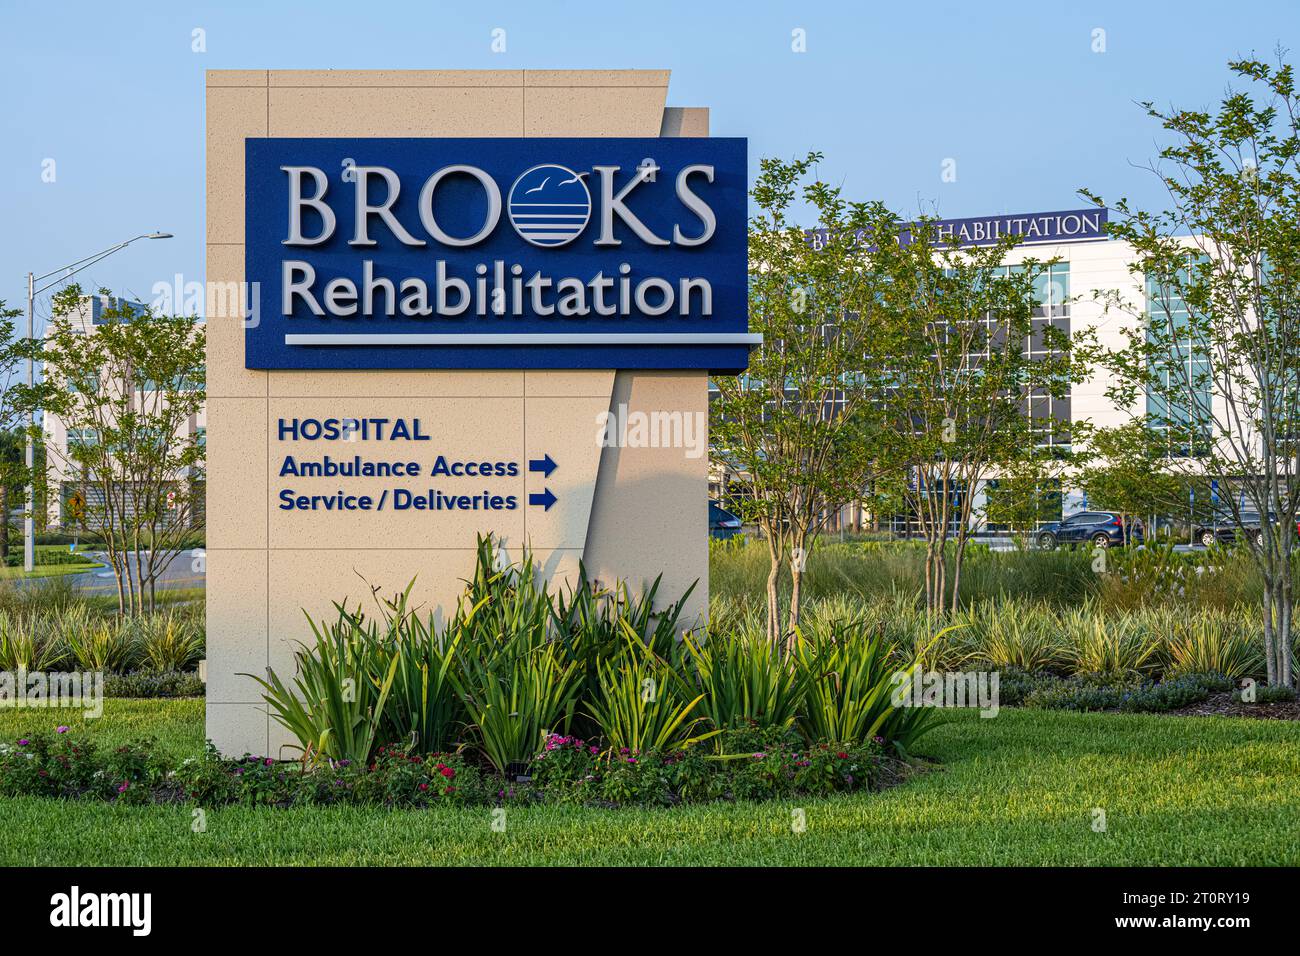 Brooks Rehabilitation (offering physical, occupational, and speech therapy) at Bartram Park in Jacksonville, Florida. (USA) Stock Photo